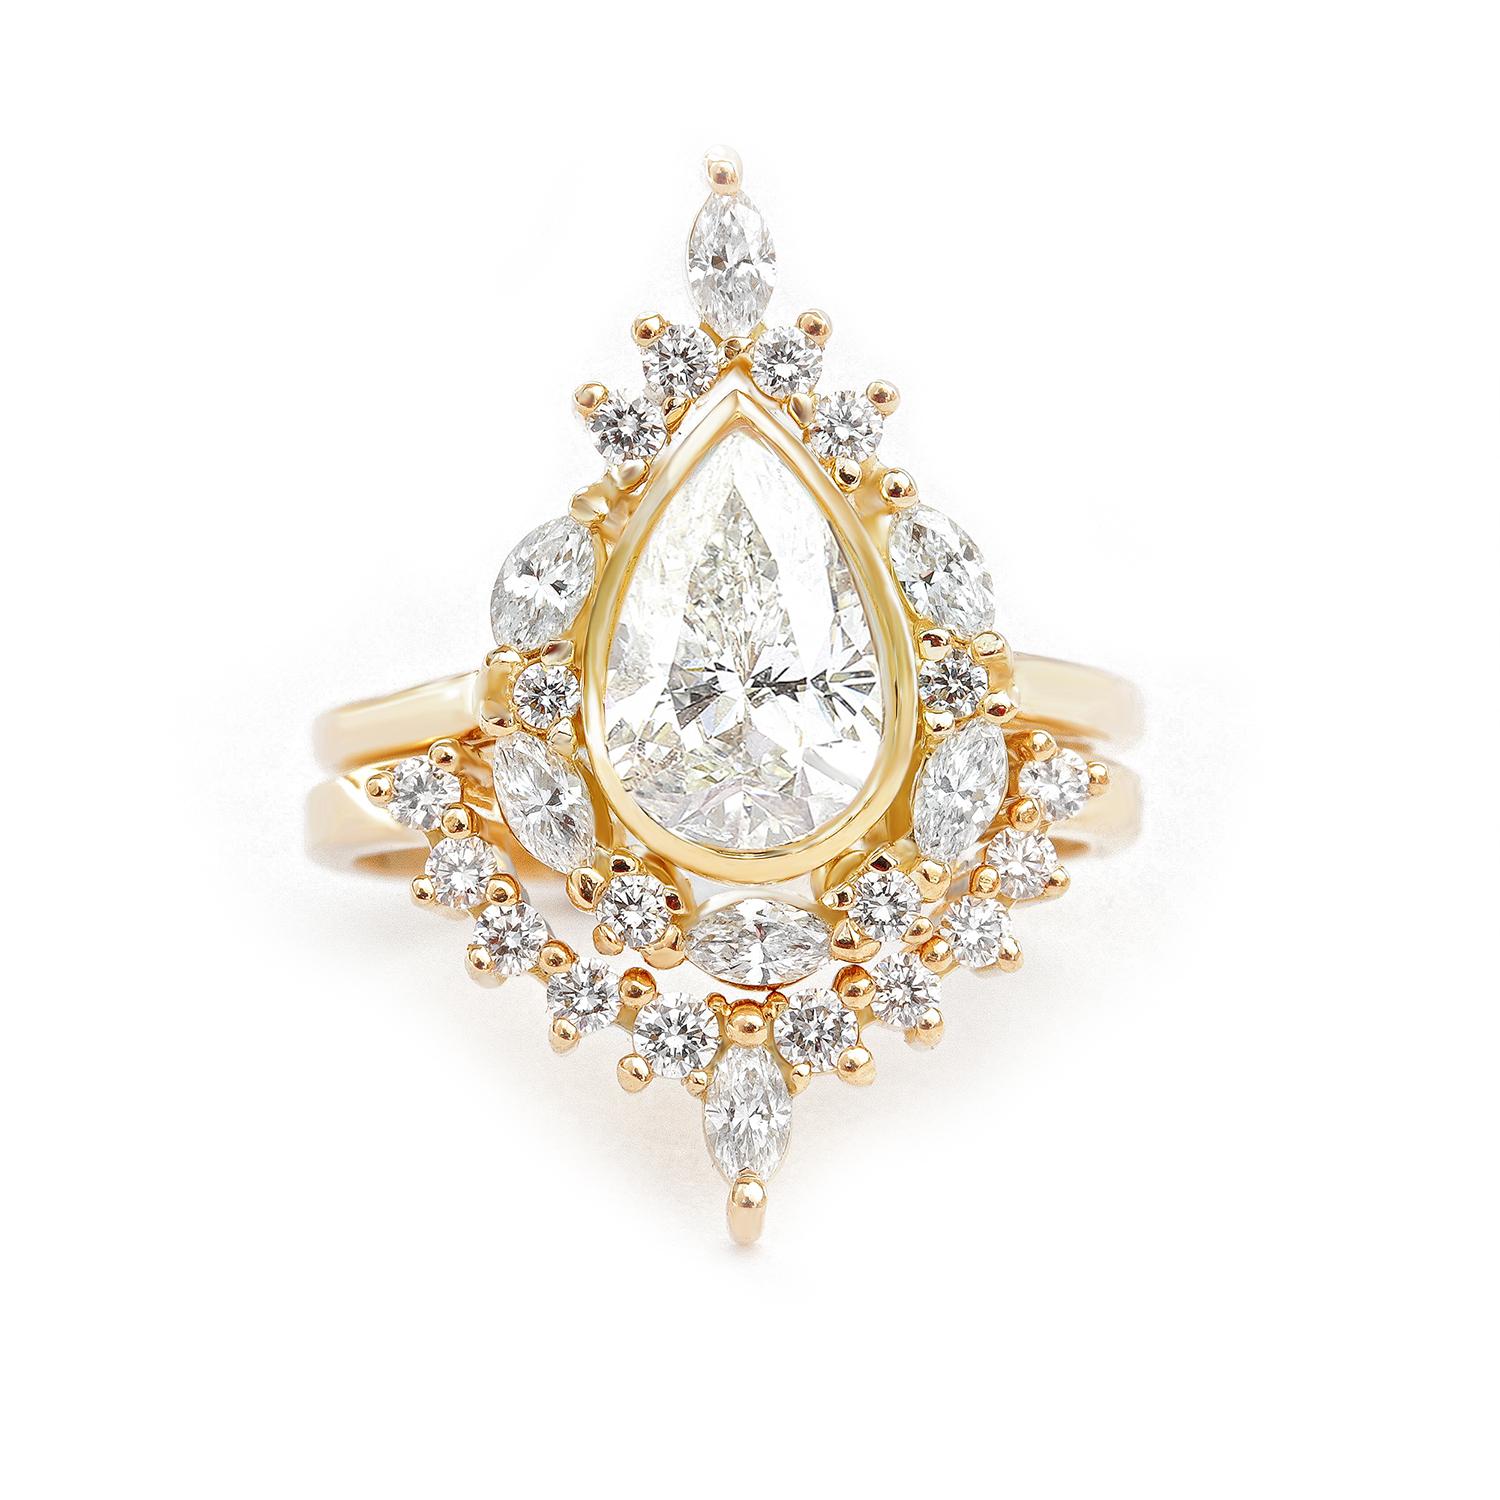 Pear Moissanite and unique diamond halo, Engagement Rings Set - Eva.
The Eva ring is named after the first woman Eva who is graceful, passionate, and full of energy & laughter. 
Handmade with care. 
An original design by Silly Shiny Diamonds. 

This